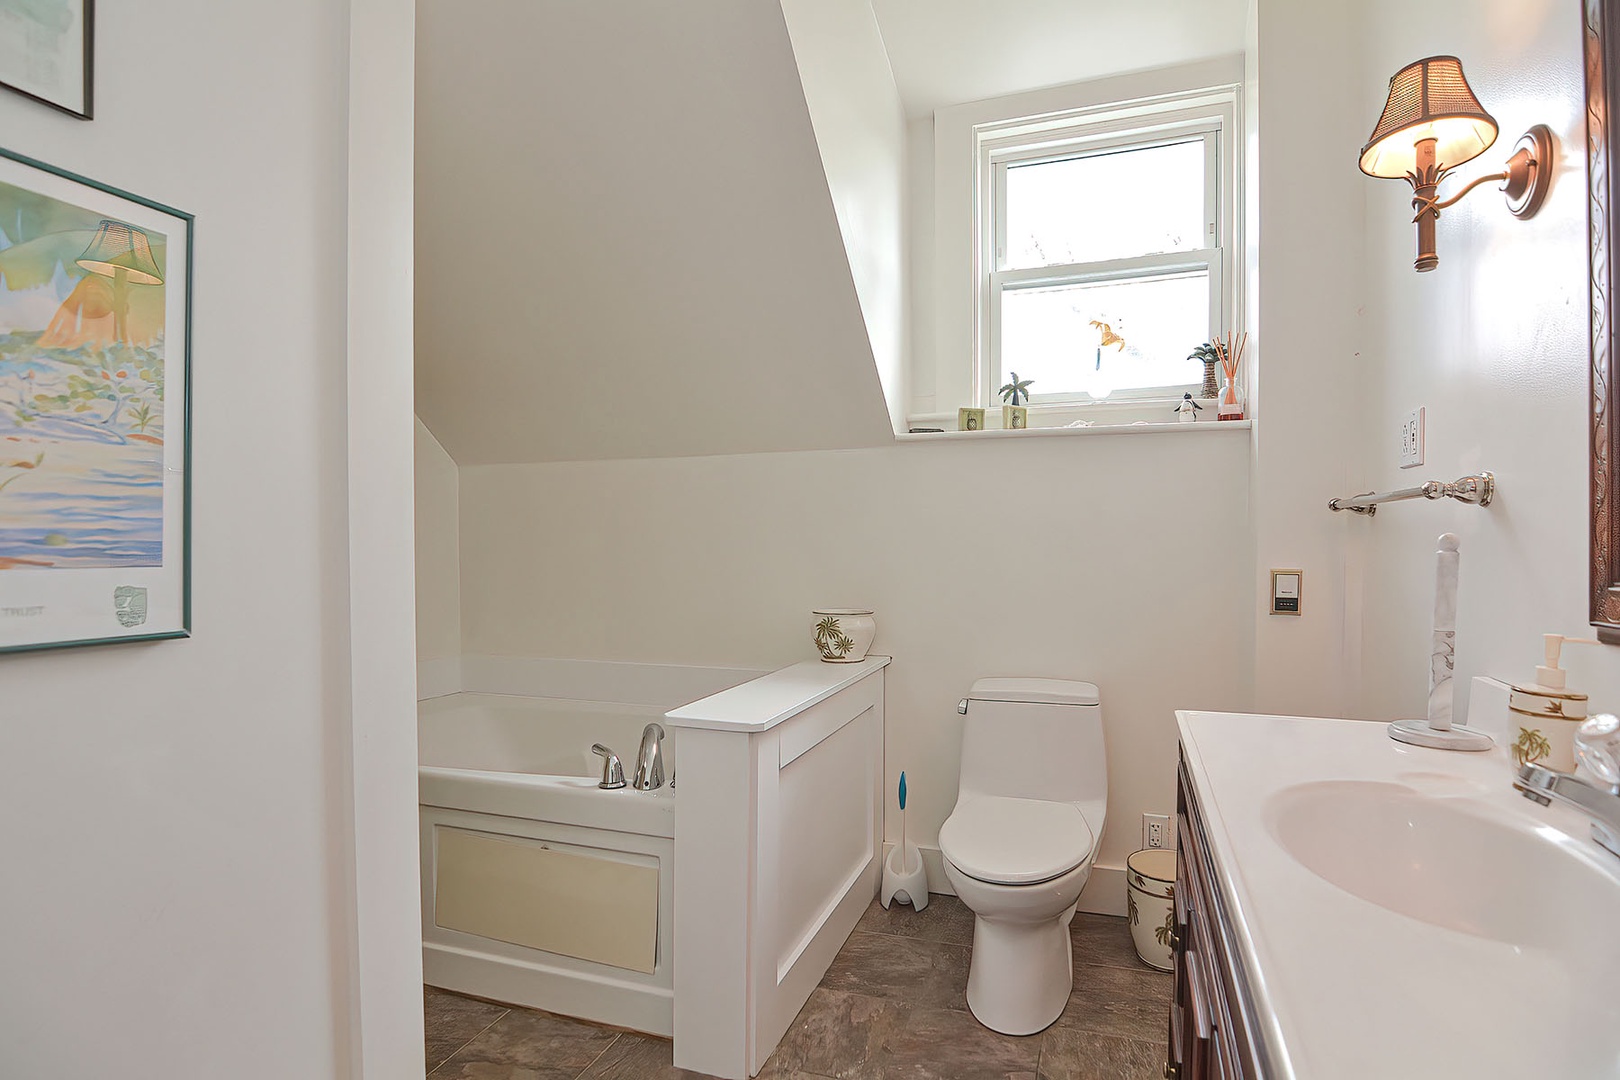 The shared full bath on the second floor includes a jetted tub.